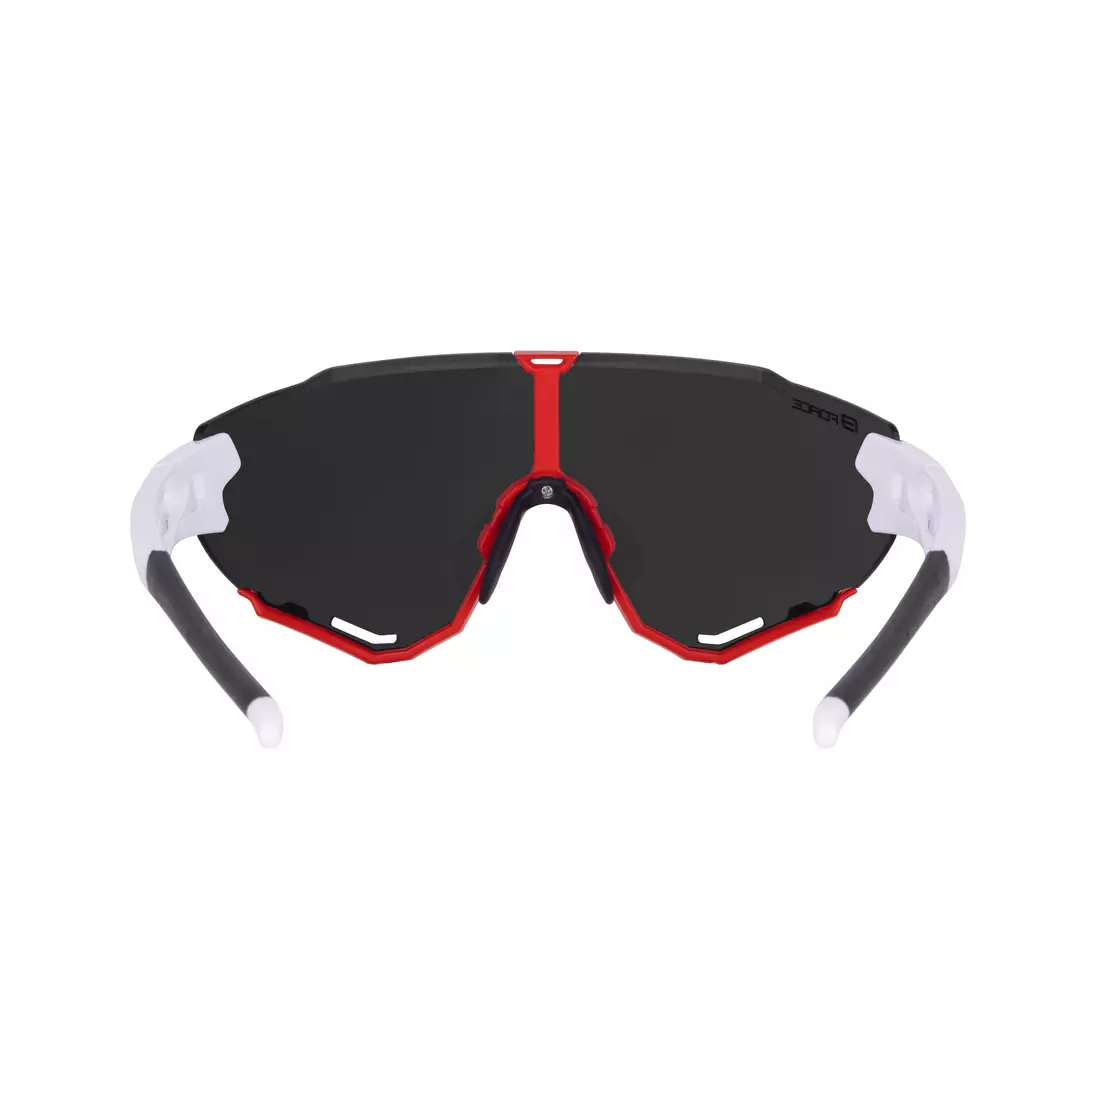 FORCE Fahrrad / Sportbrille CREED Weiß Rot, 91182